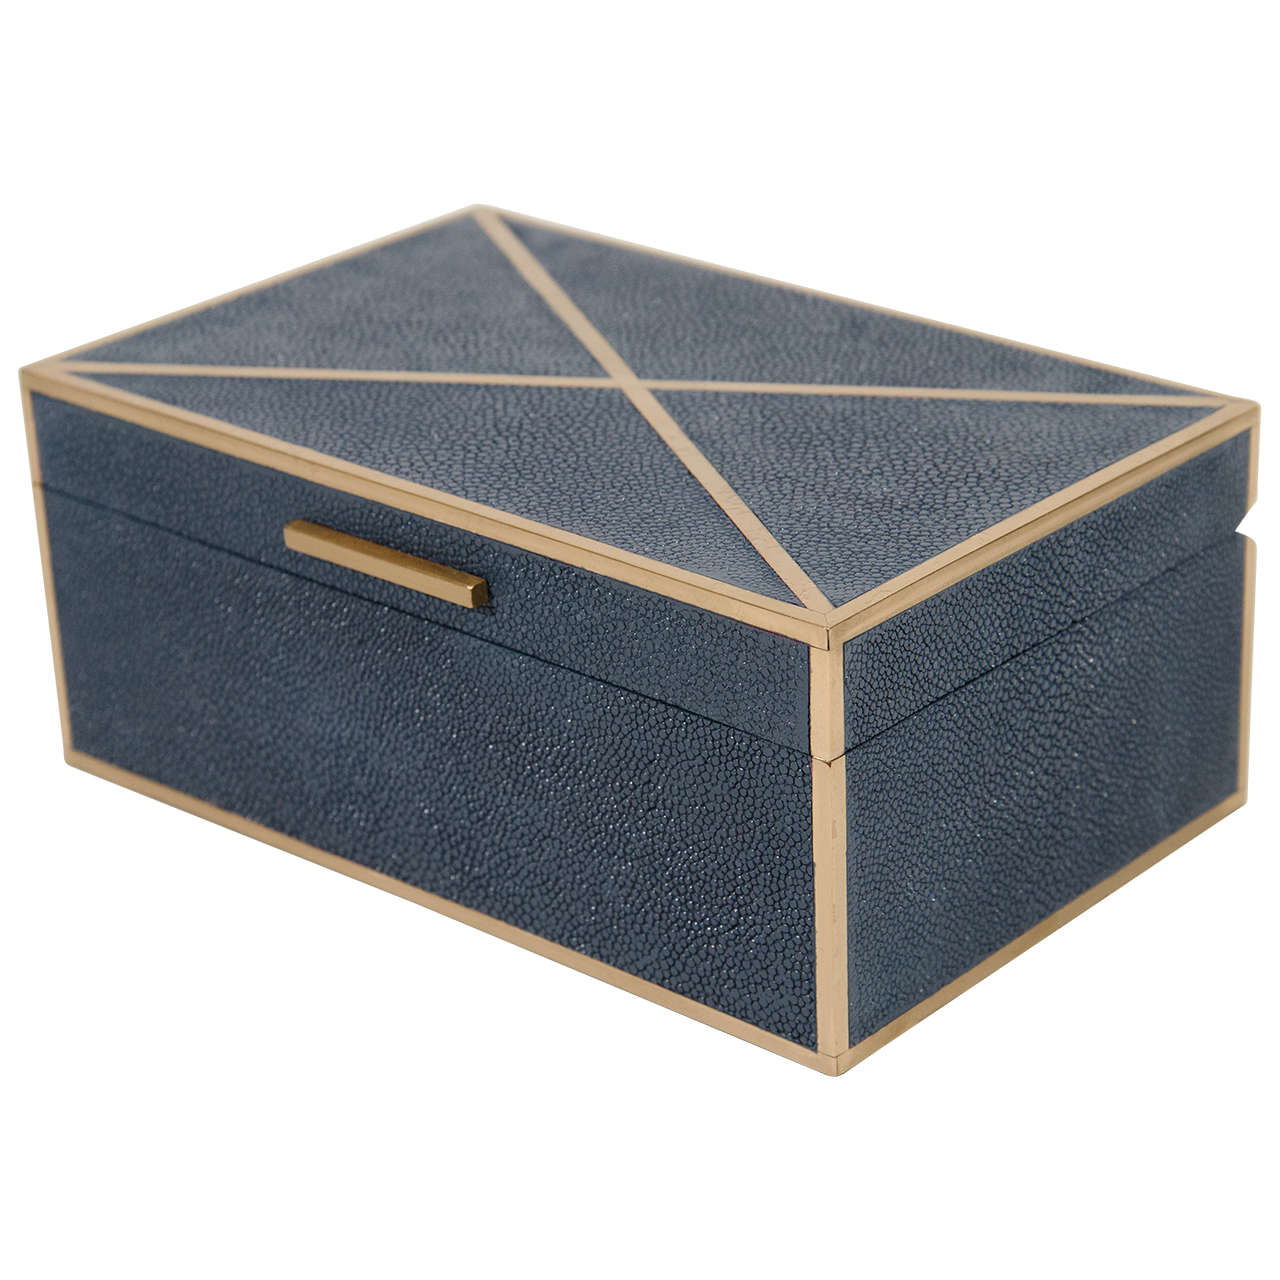 Blue Shagreen Box with Brass Detailing